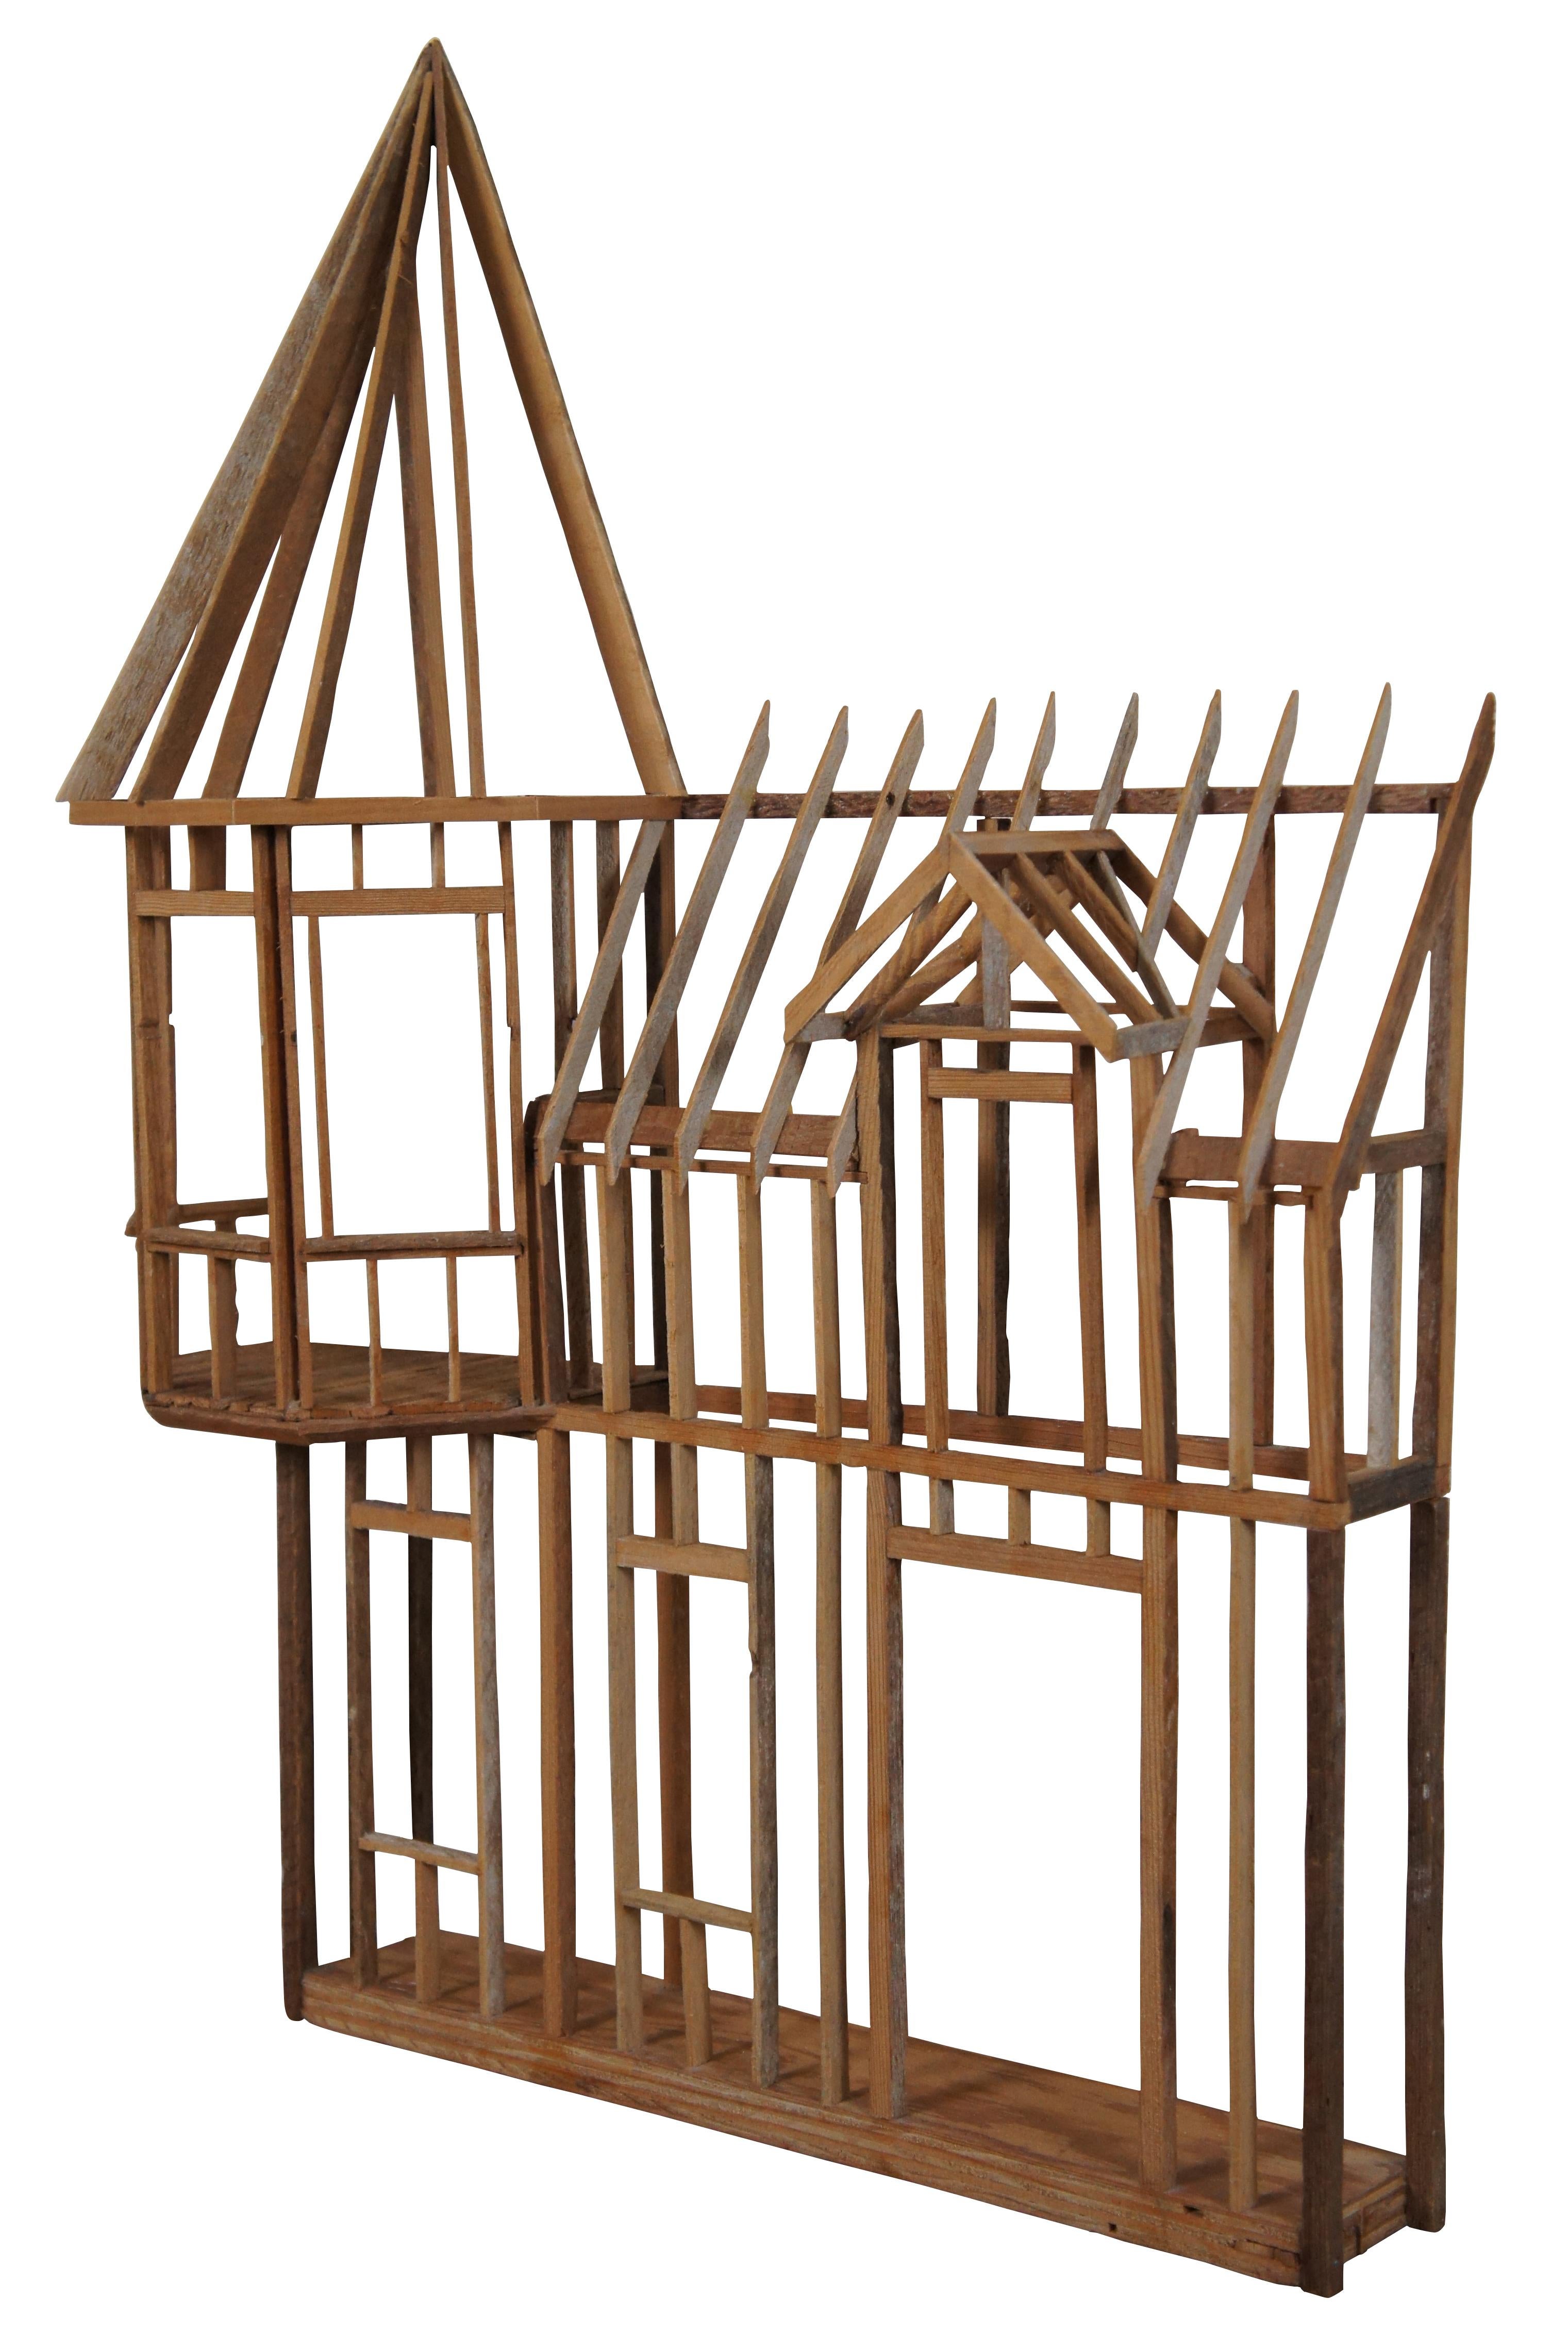 Unique piece of hand crafted wooden wall art trinket display, representing the front facade of a doll house or house shaped bird cage. Marked “Handcrafted by Ron Hundt – Completed Aug. 1996”.
Measures: 30